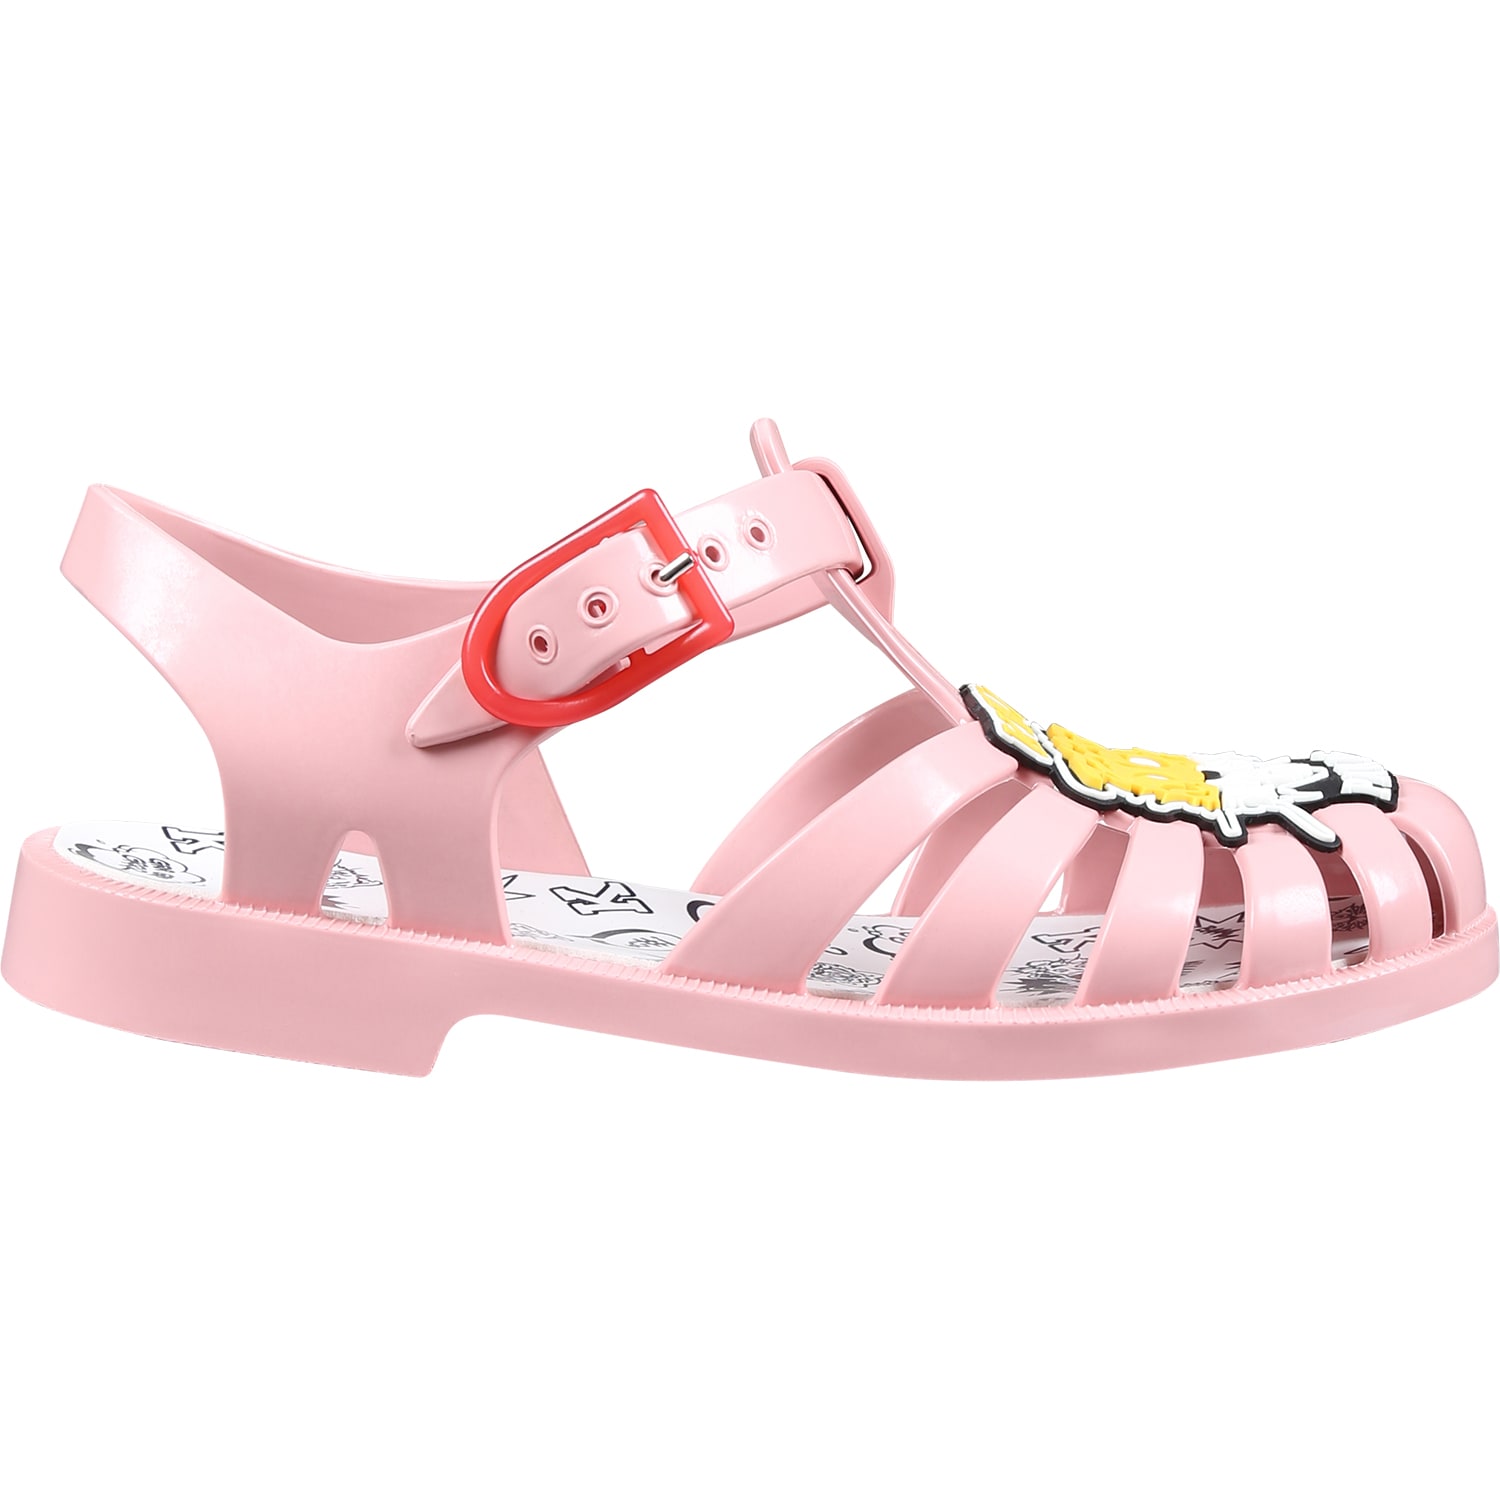 Shop Kenzo Pink Sandals For Girl With Tiger